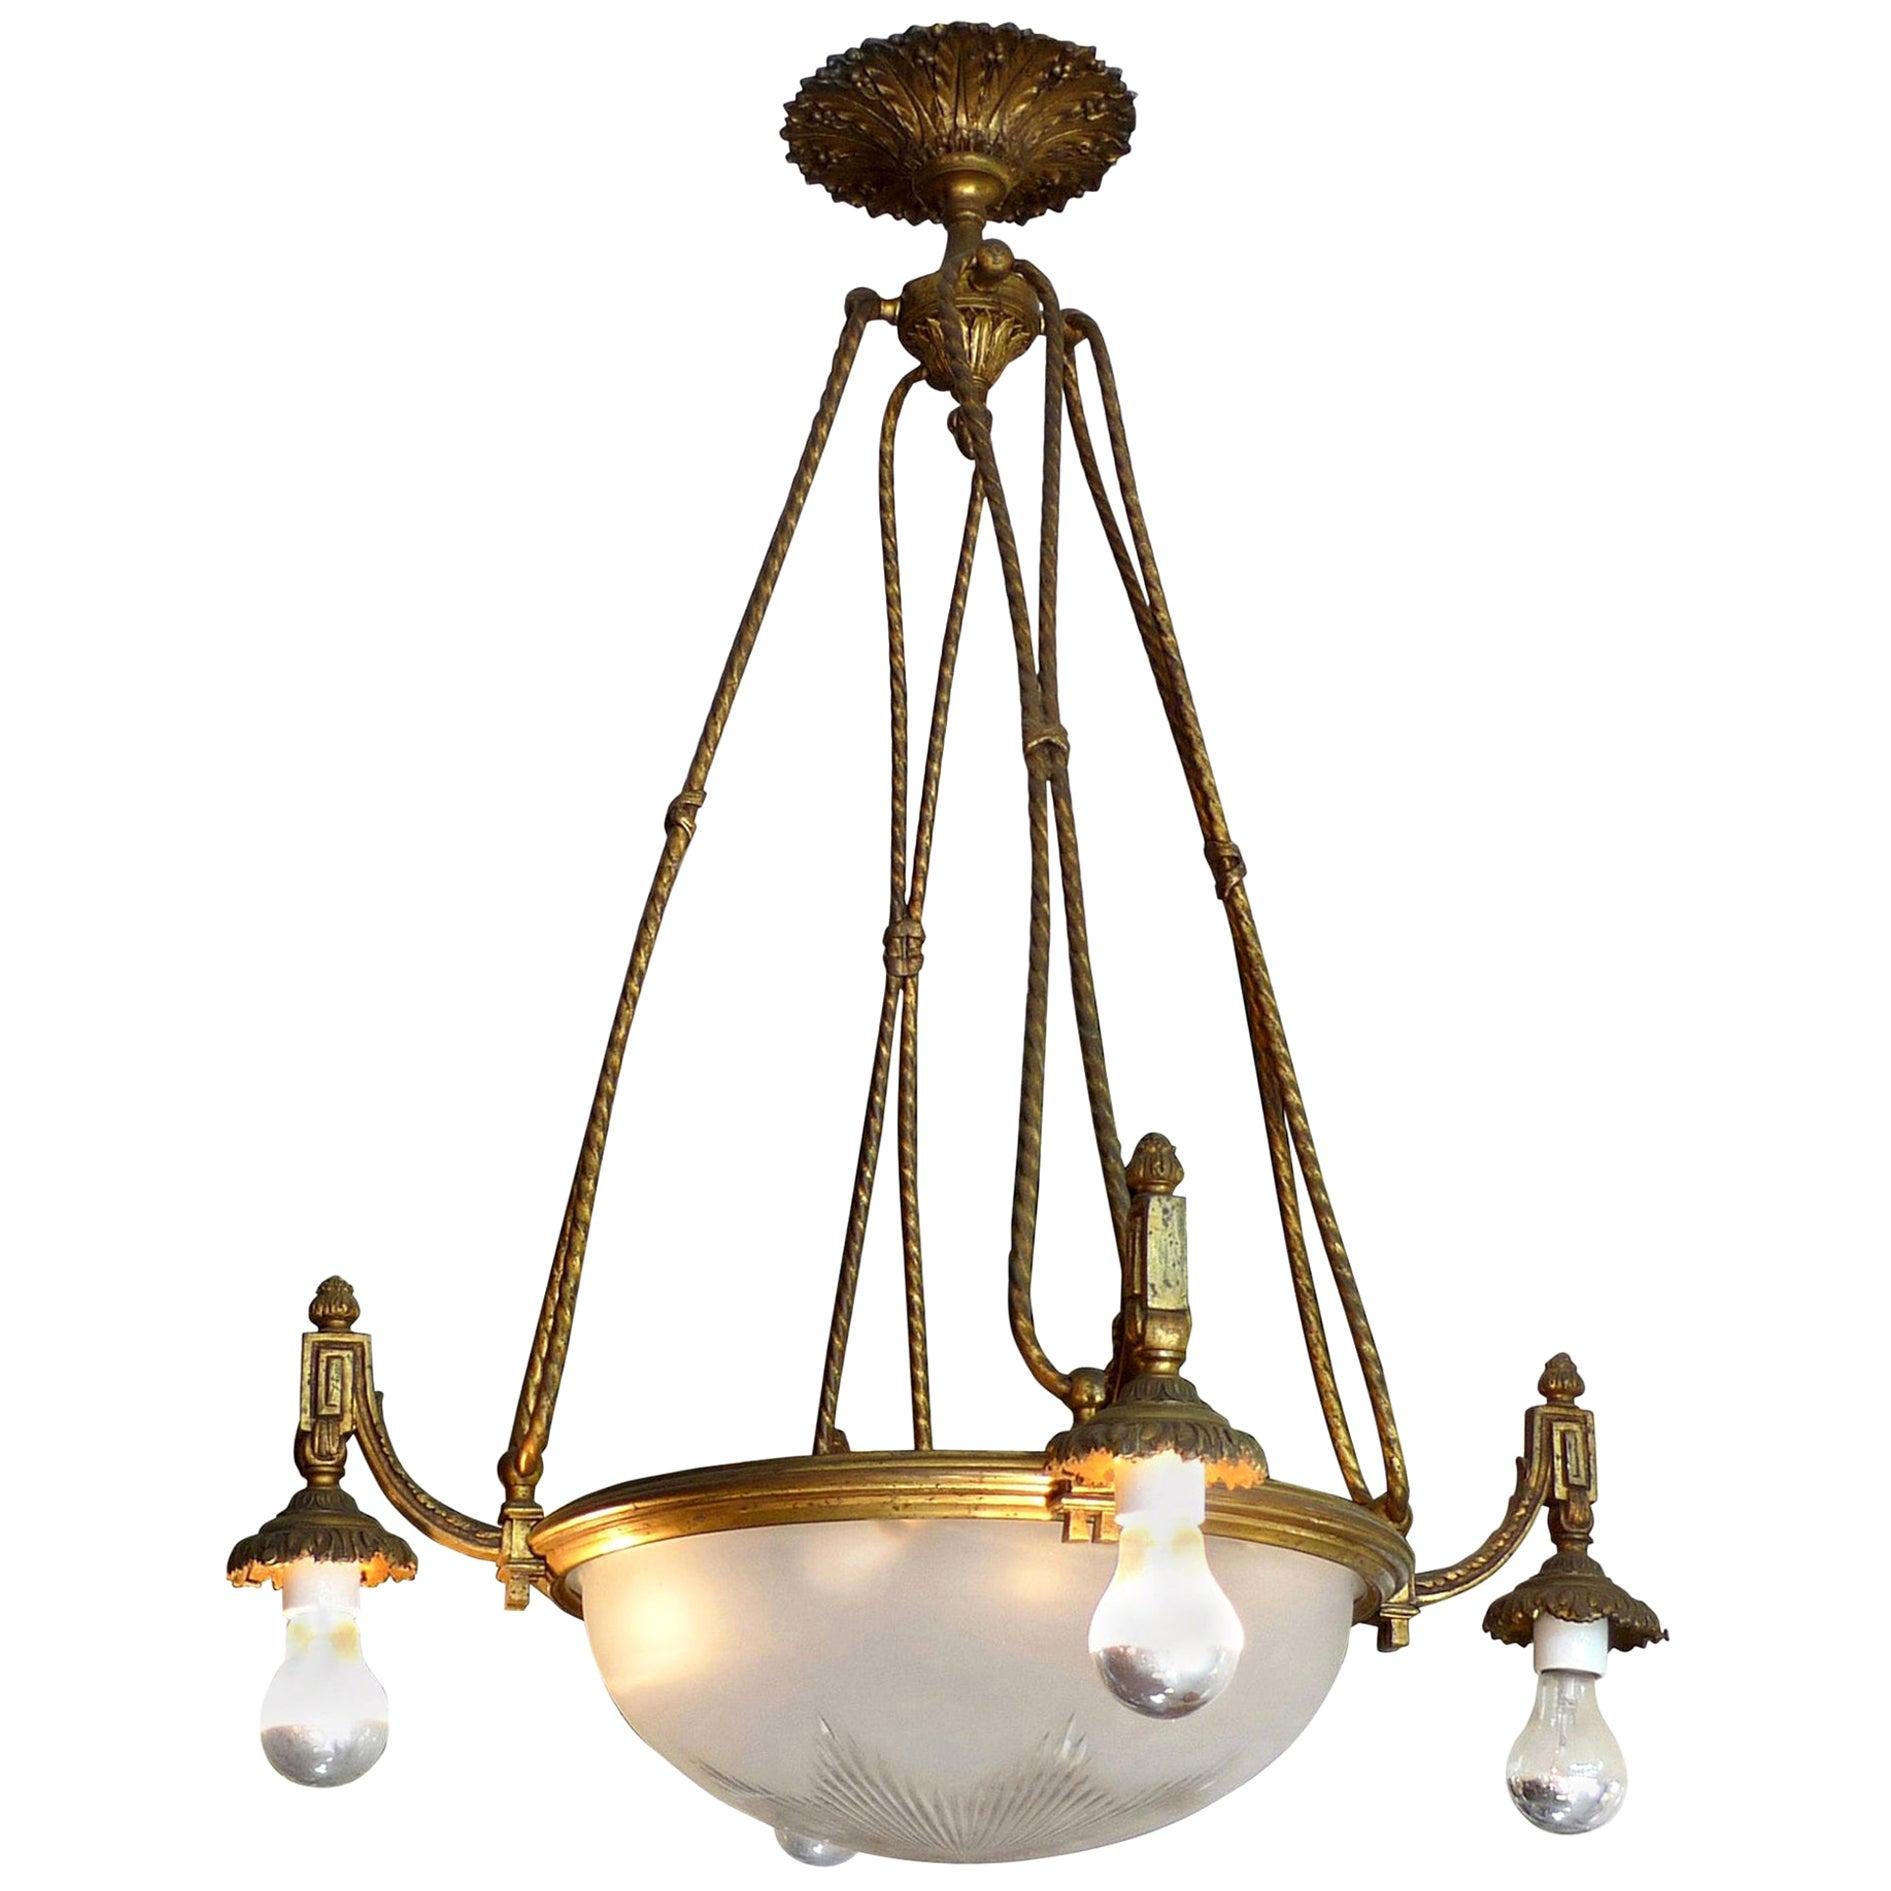 French 1940s Bronze and Crystal Chandelier with 8-Light and Frosted Cut Crystal